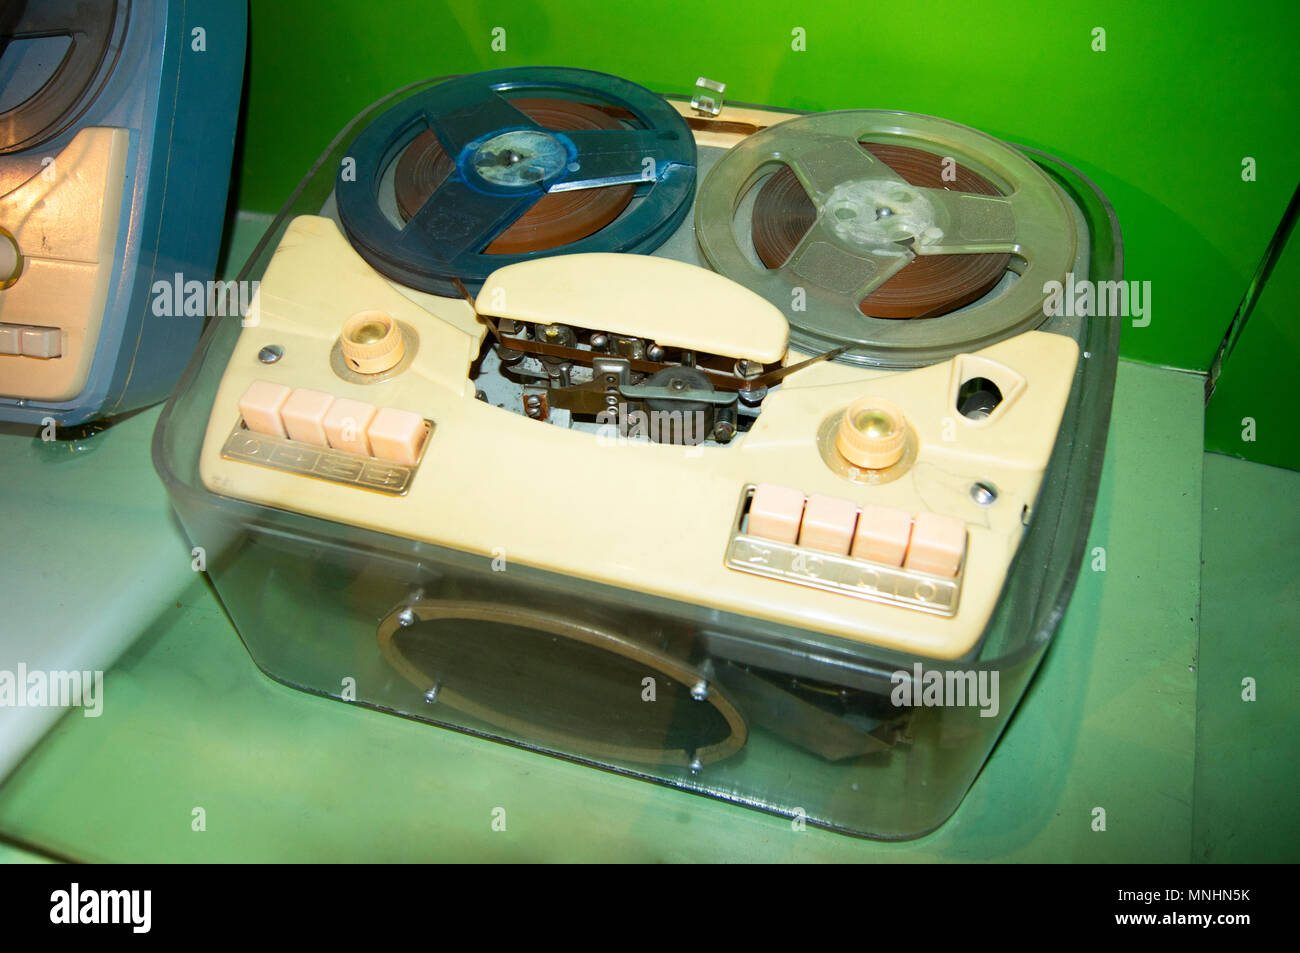 An old reel-to-reel tape recorder on display at the China Science and Technology Museum in Beijing, China. Stock Photo